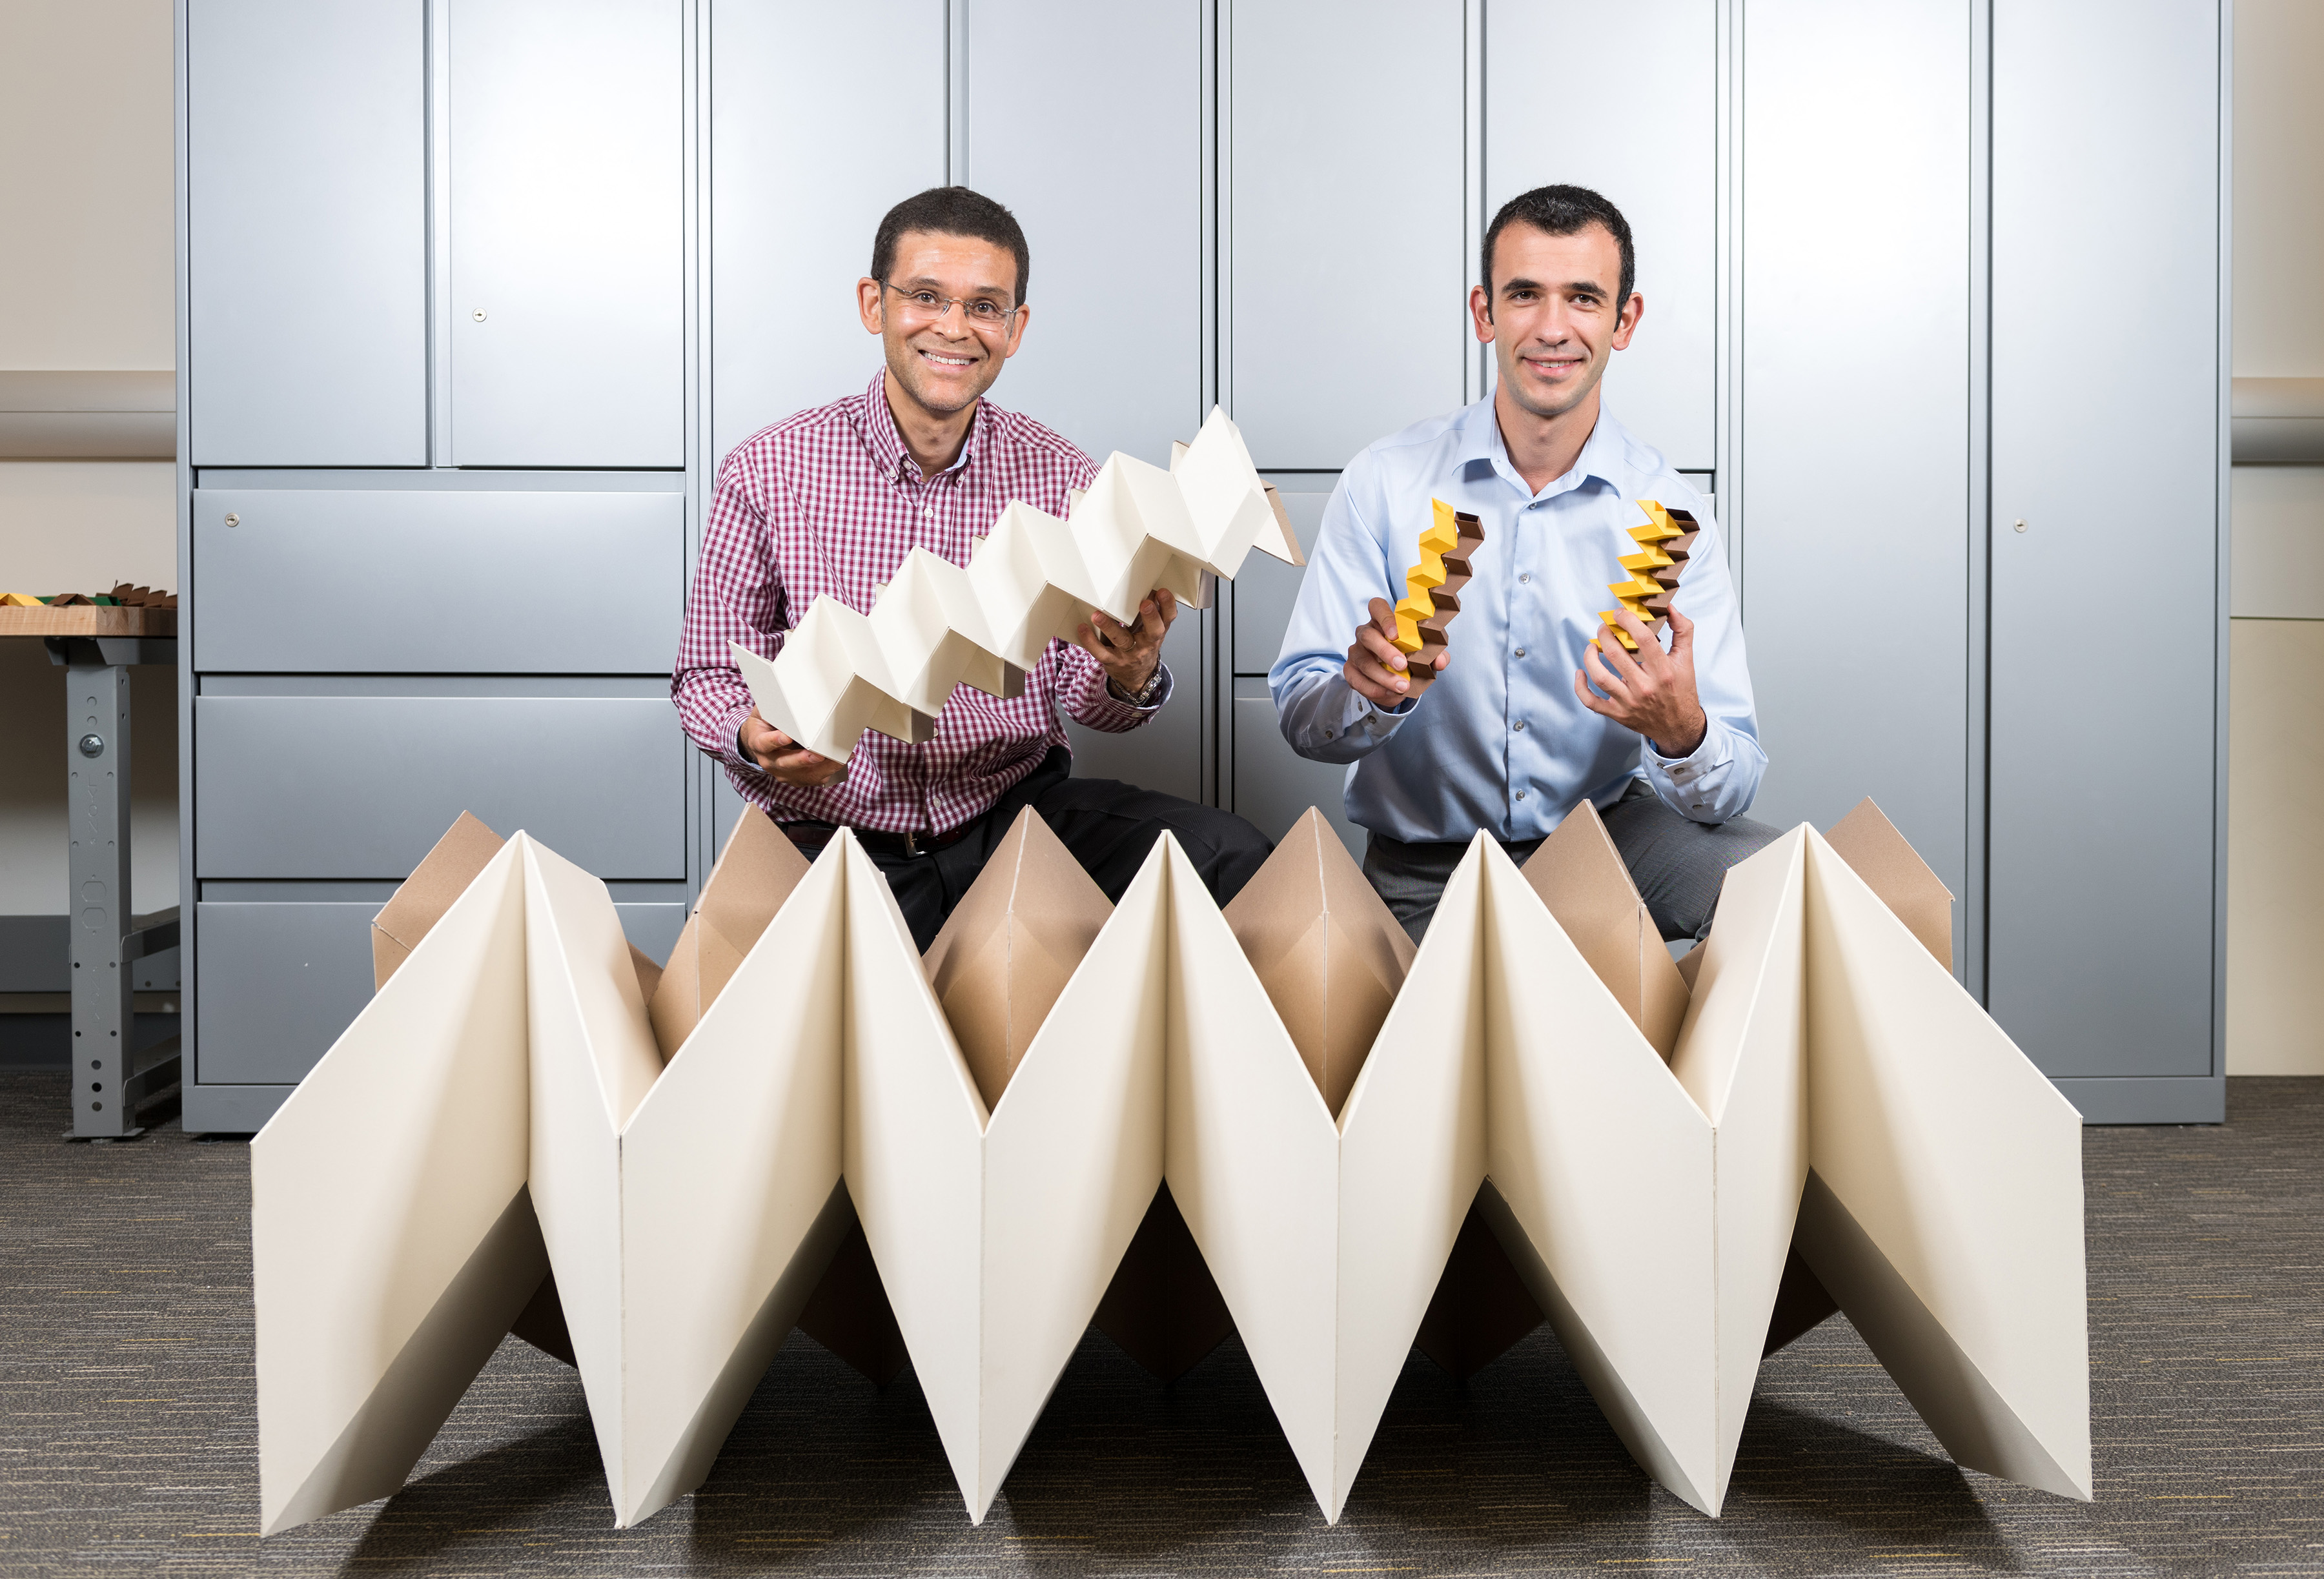 Researchers Glaucio Paulino (left) and Evgueni Filipov with three origami structures showing the size flexibility of the "zippered tube" system. Filipov is from University of Illinois at Urbana-Champaign; Paulino is from the Georgia Institute of Technology. (Credit: Rob Felt, Georgia Tech) 